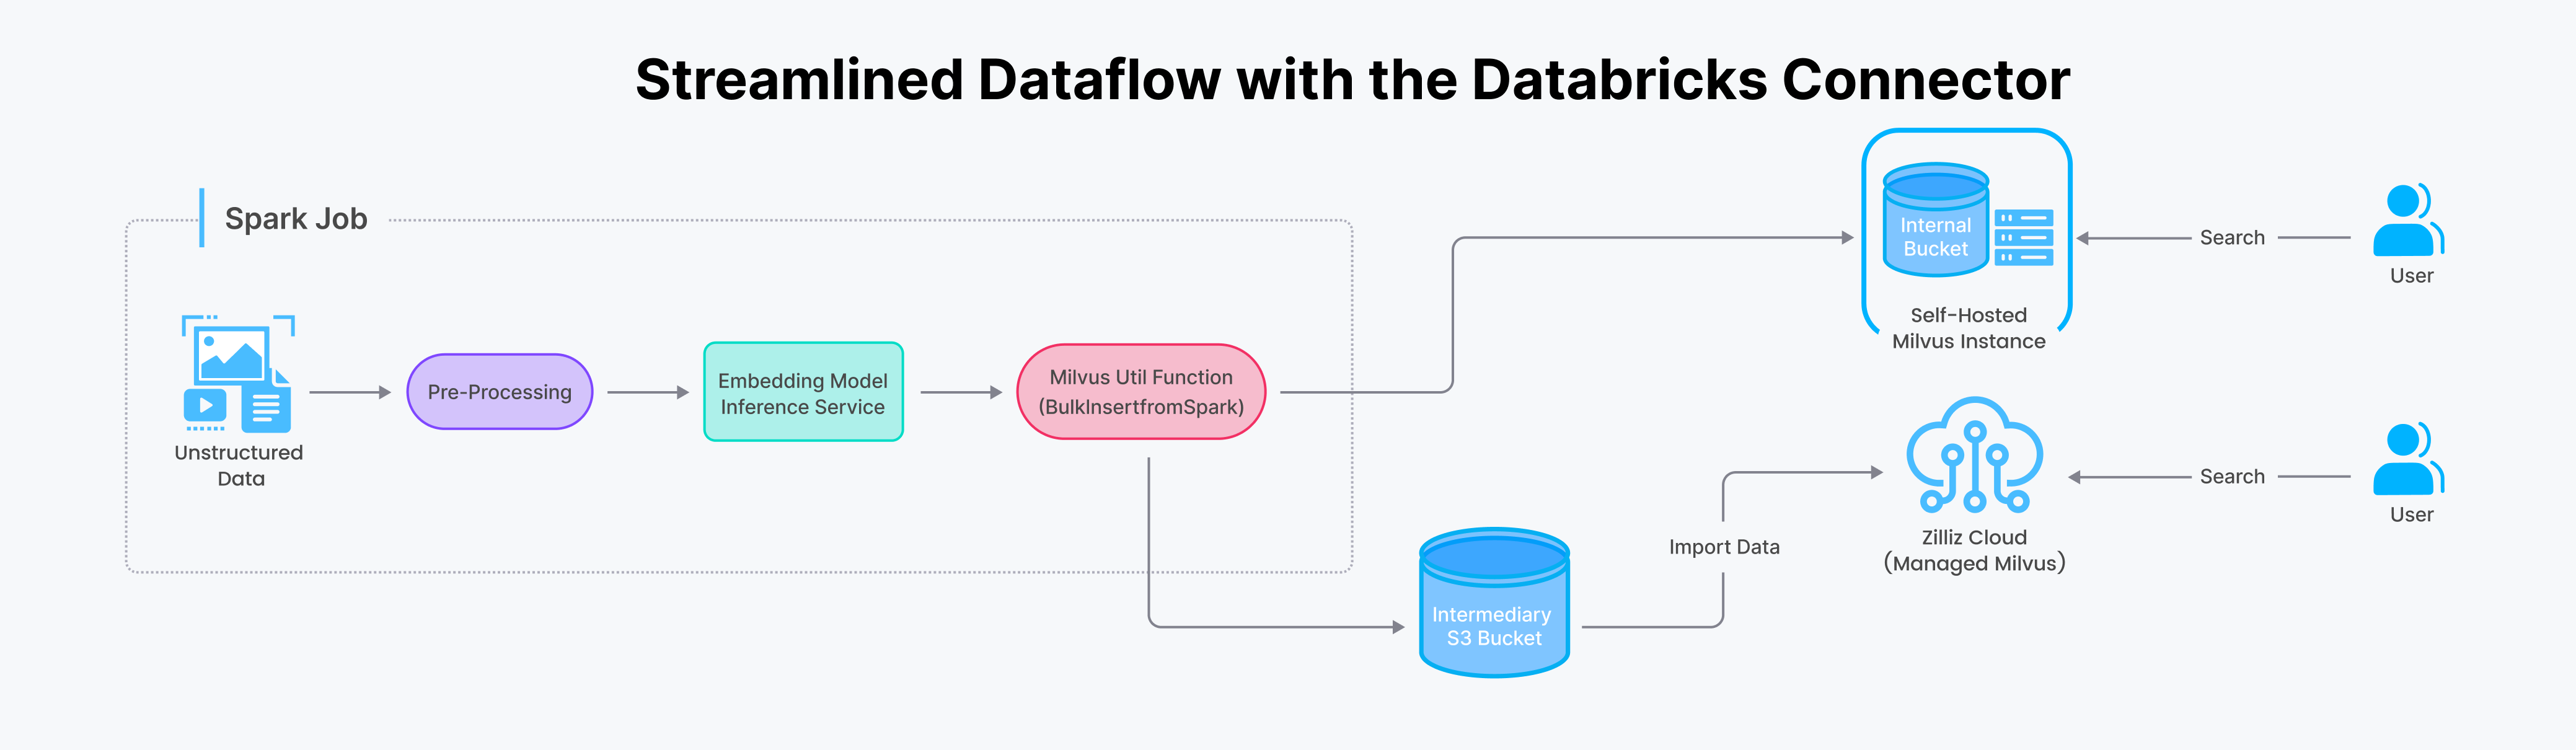 Streamlined Dataflow with the Databricks Connector.png